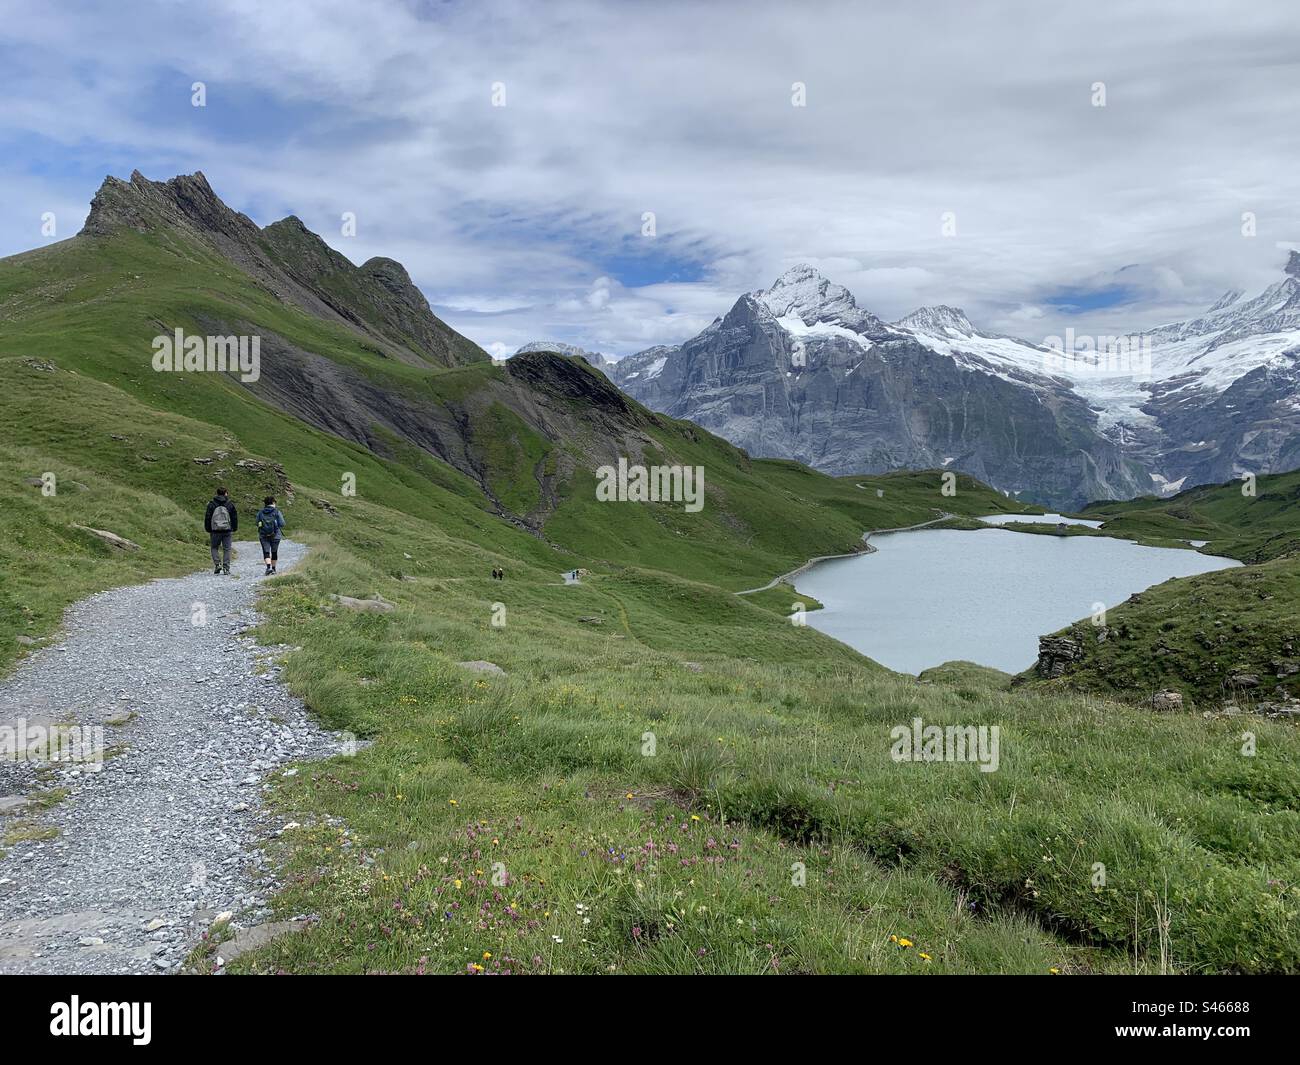 Hiking in Swiss alps lake bachsee Stock Photo